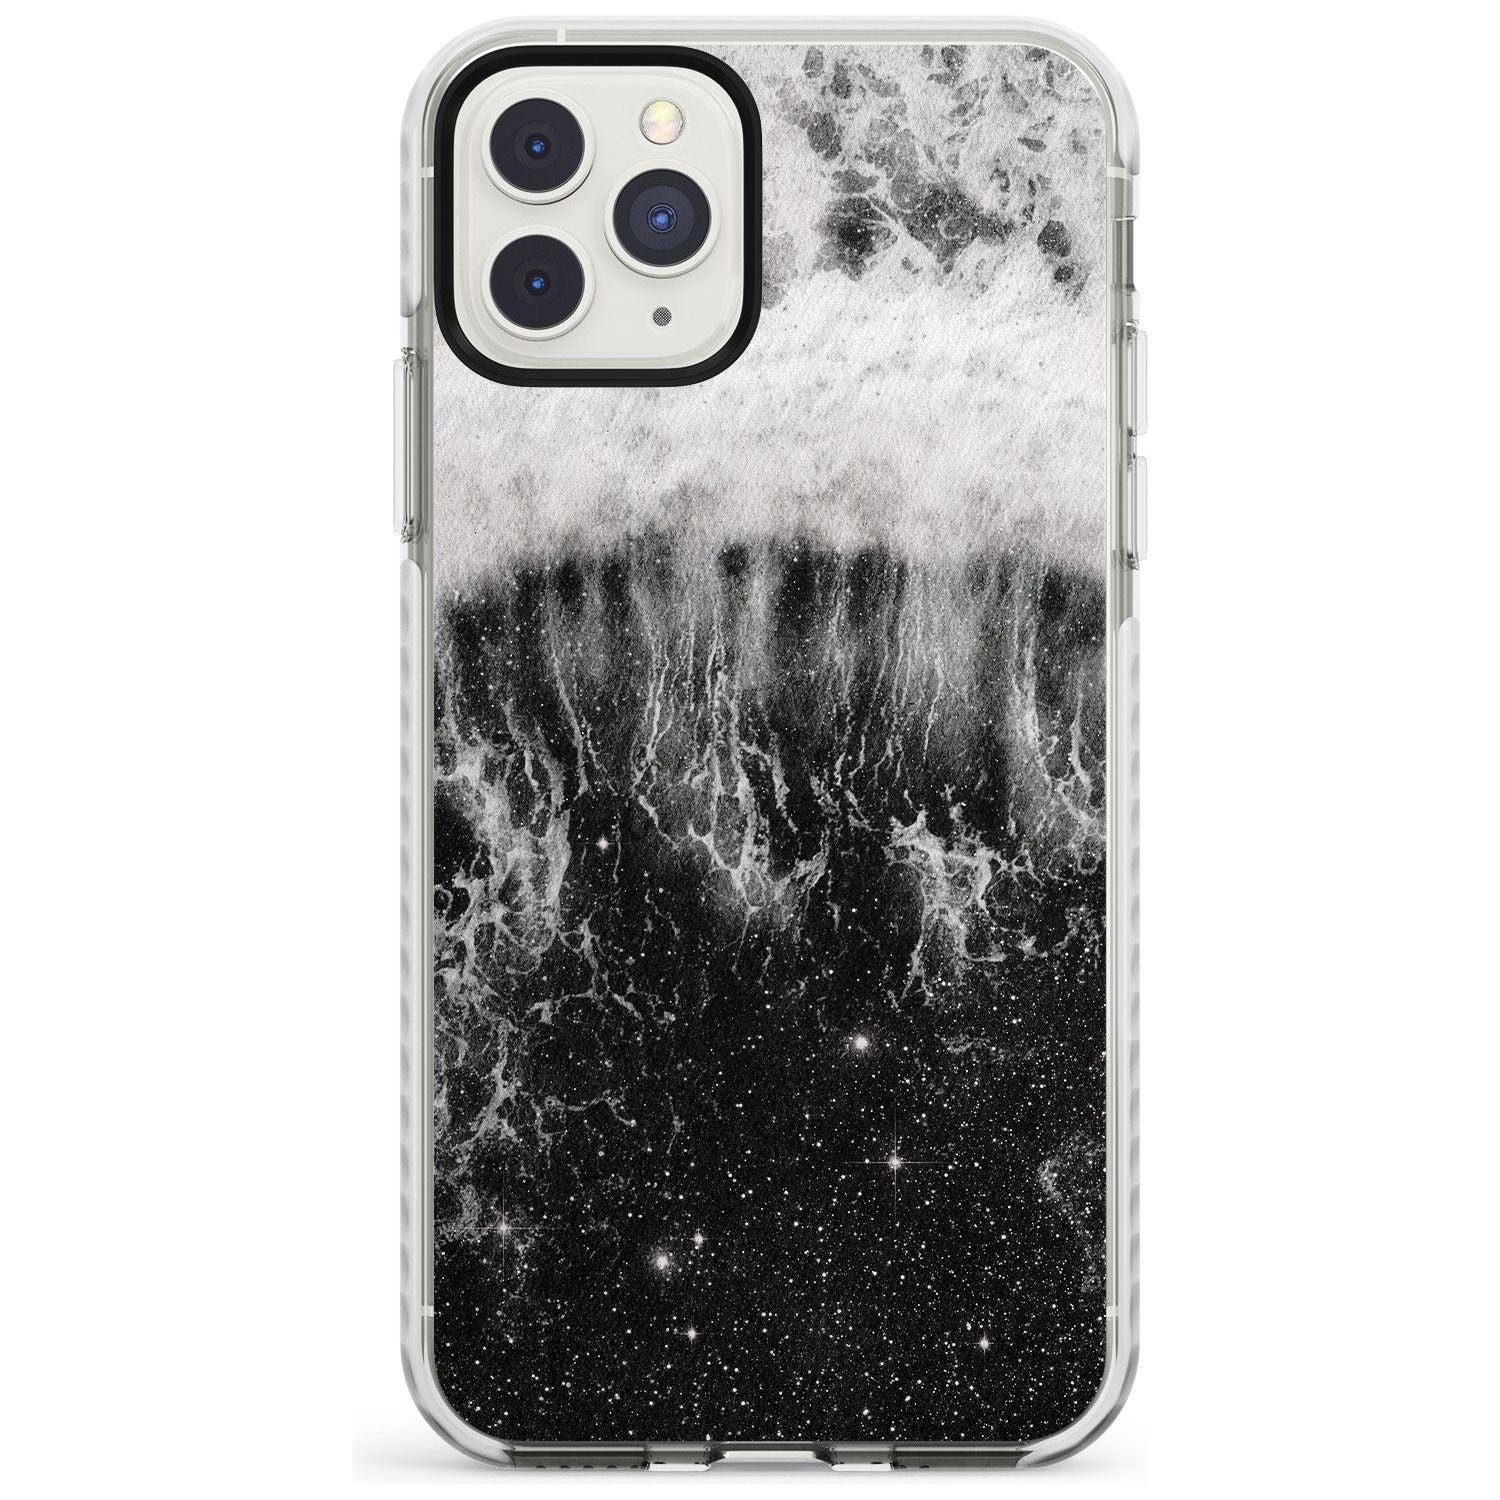 Ocean Wave Galaxy Print Impact Phone Case for iPhone 11 Pro Max